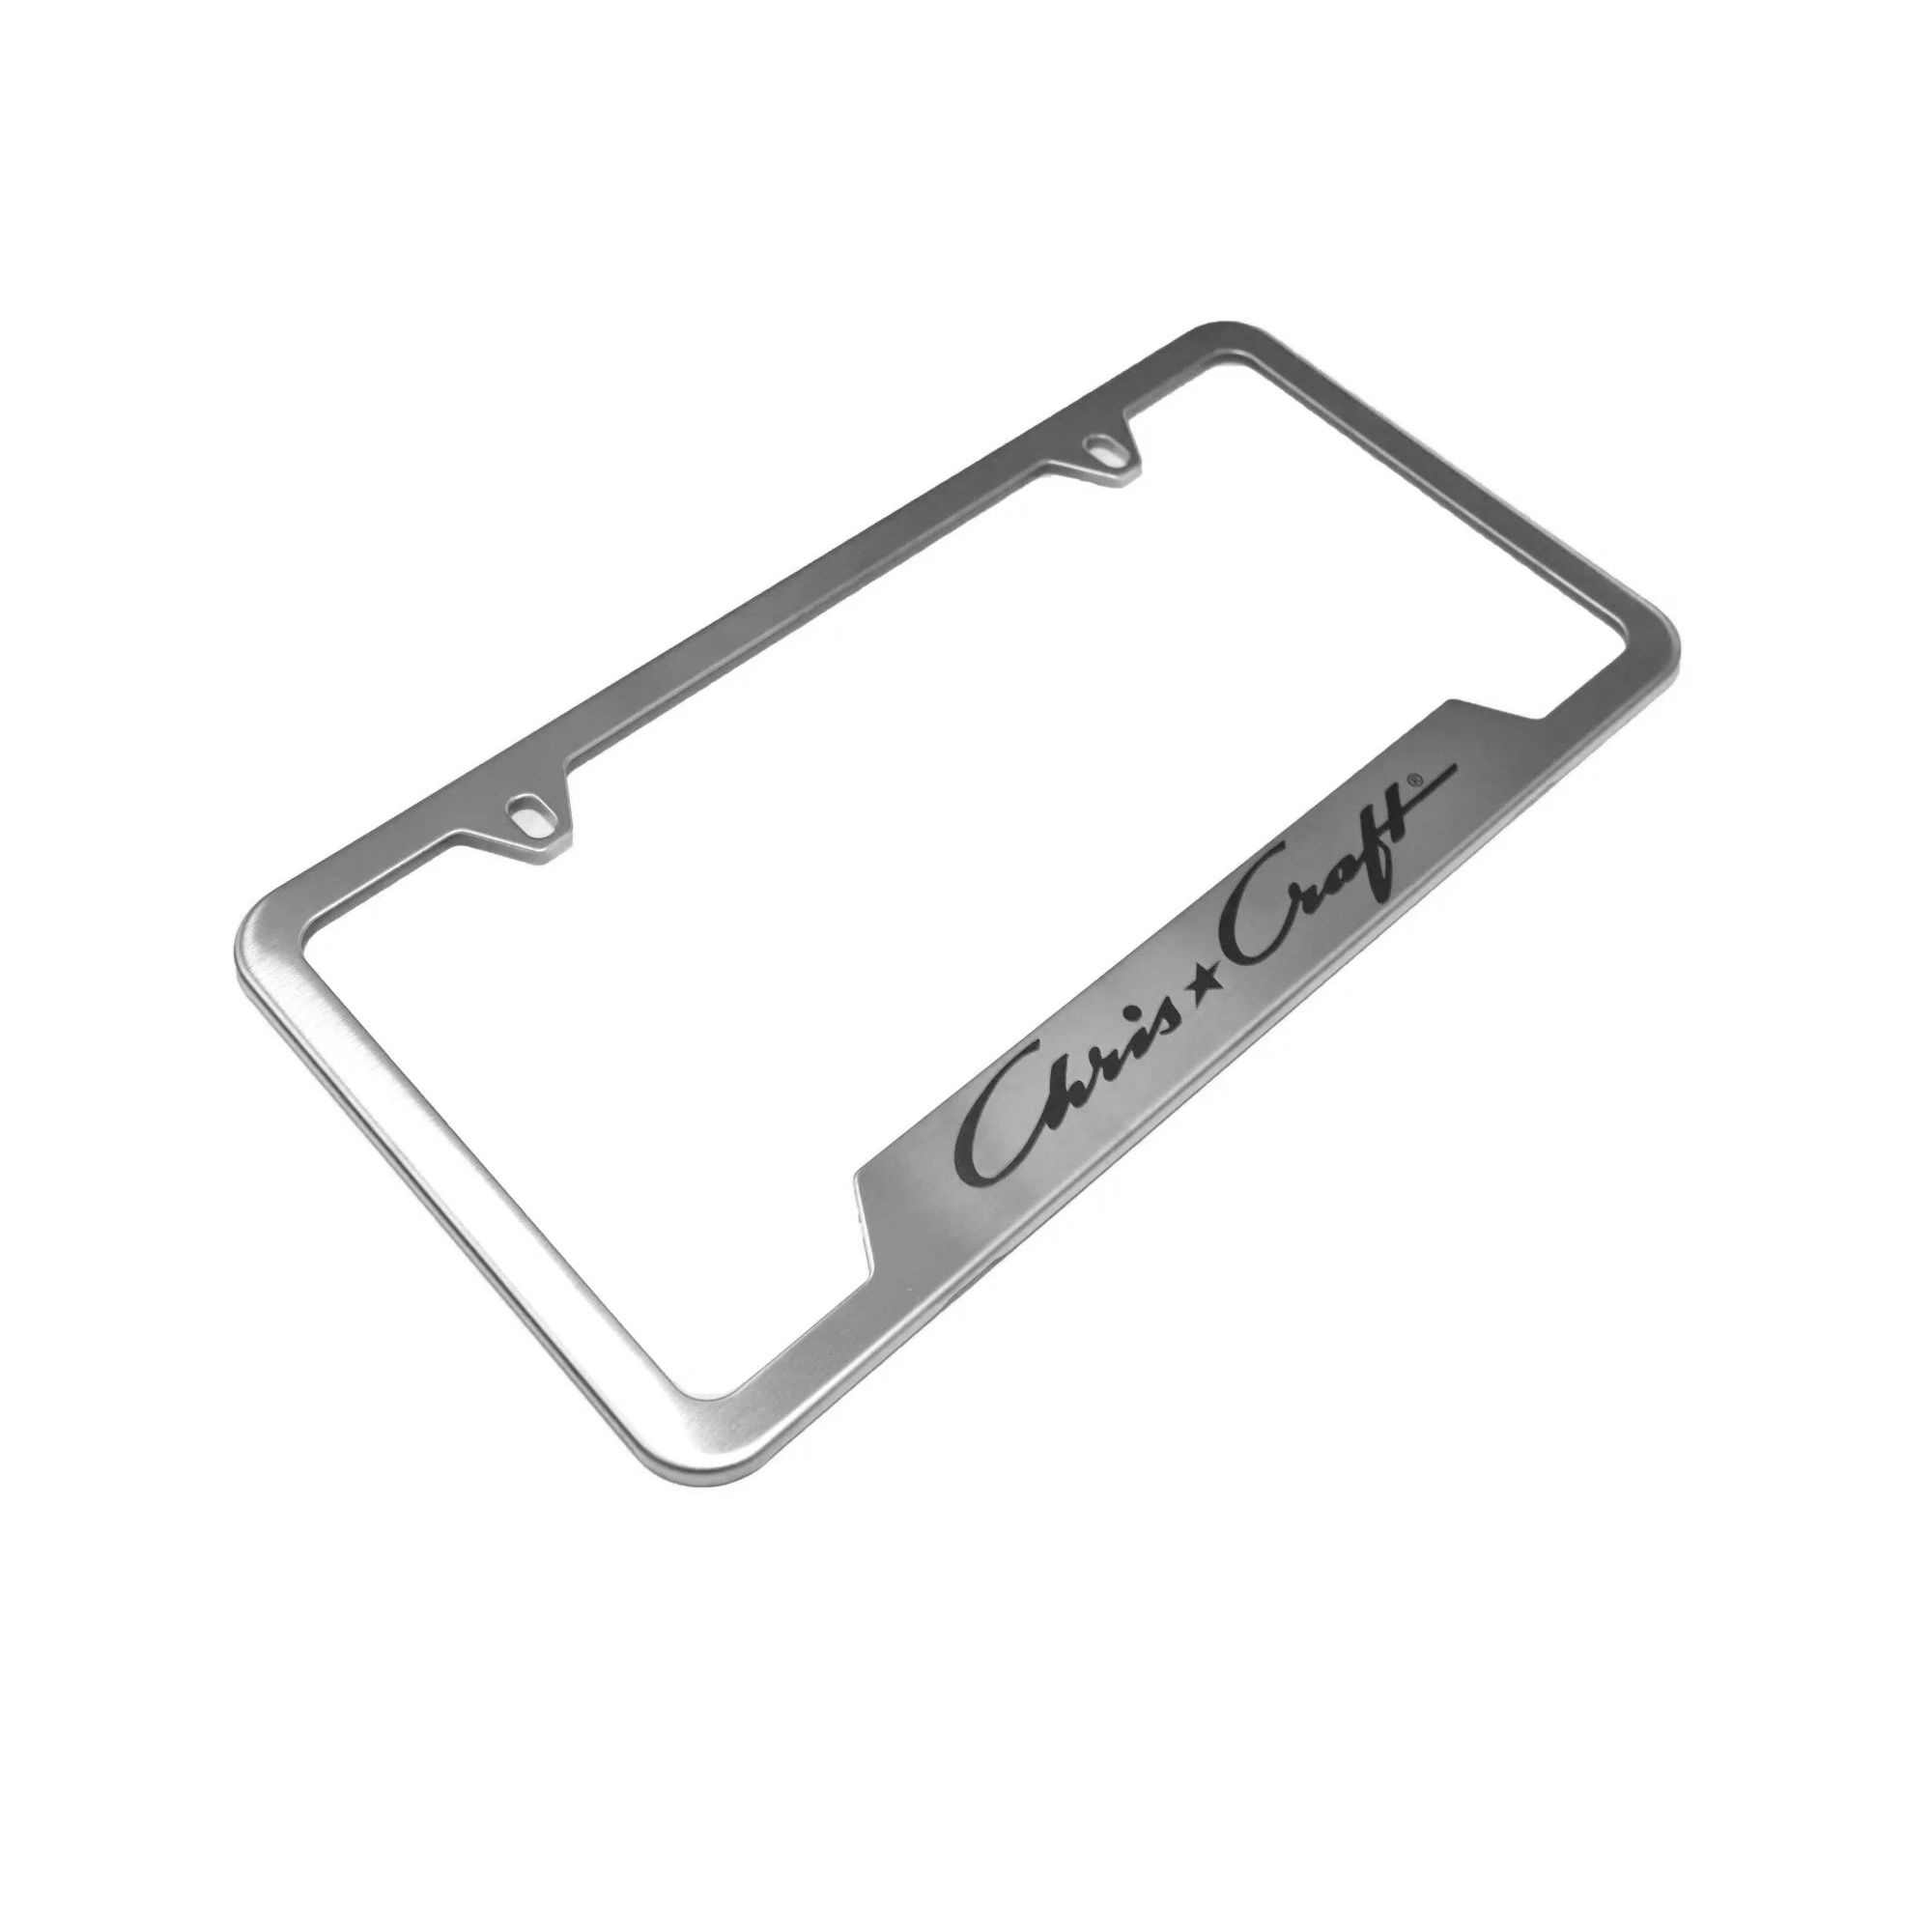 Chris-Craft License Plate Frame - Brushed Stainless